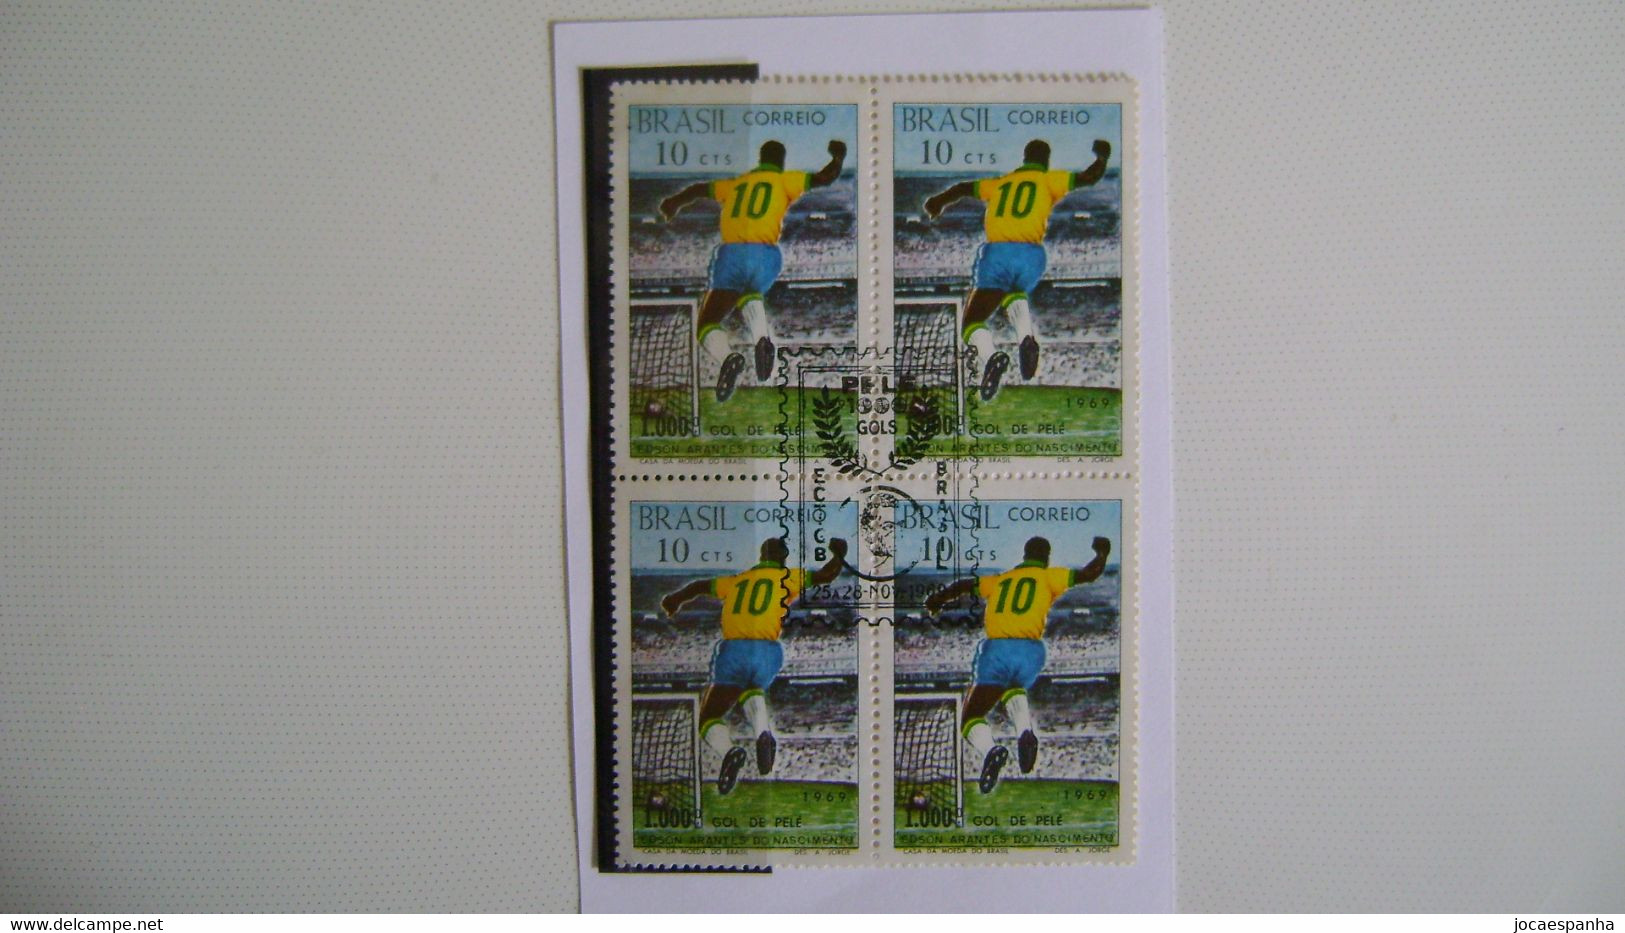 BRAZIL / BRASIL - STAMP ON COURT OF THE 1000th GOL OF THE PELE KING WITH COMMEMORATIVE STAMP IN 1969 - Gebraucht